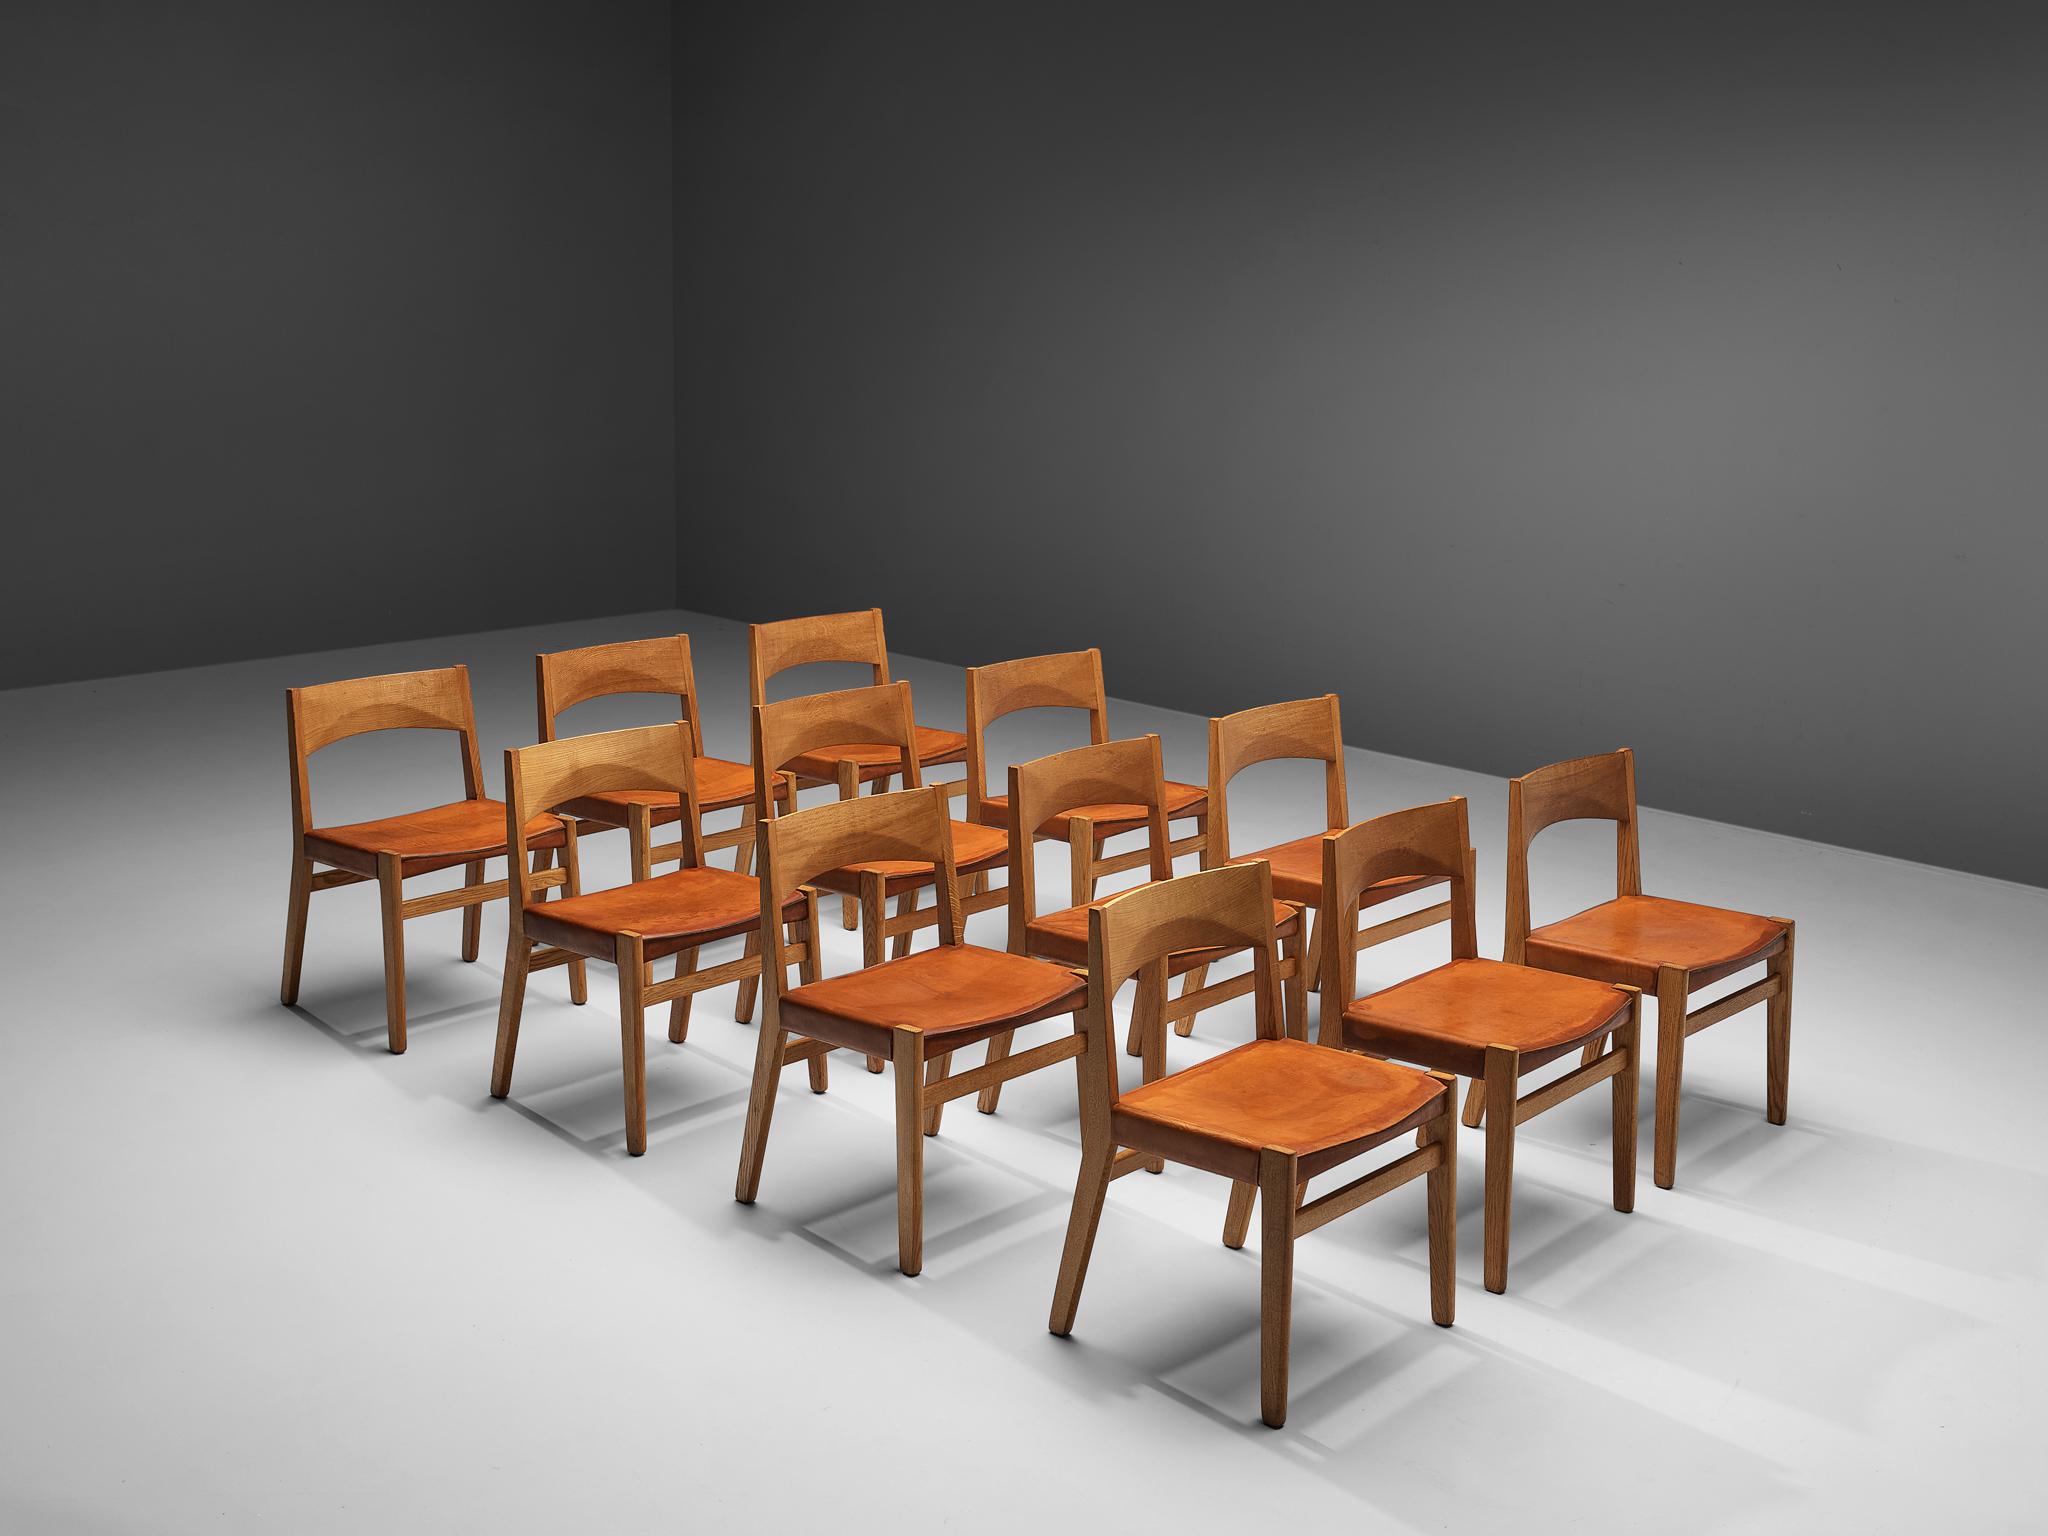 John Vedel-Rieper for Erhard Rasmussen, set of 12 dining chairs, oak, leather, Denmark, 1957.

Danish designer John Vedel-Rieper created this dining chair in 1957 for Erhard Rasmussen. The strong lines and the well-designed proportions as well as